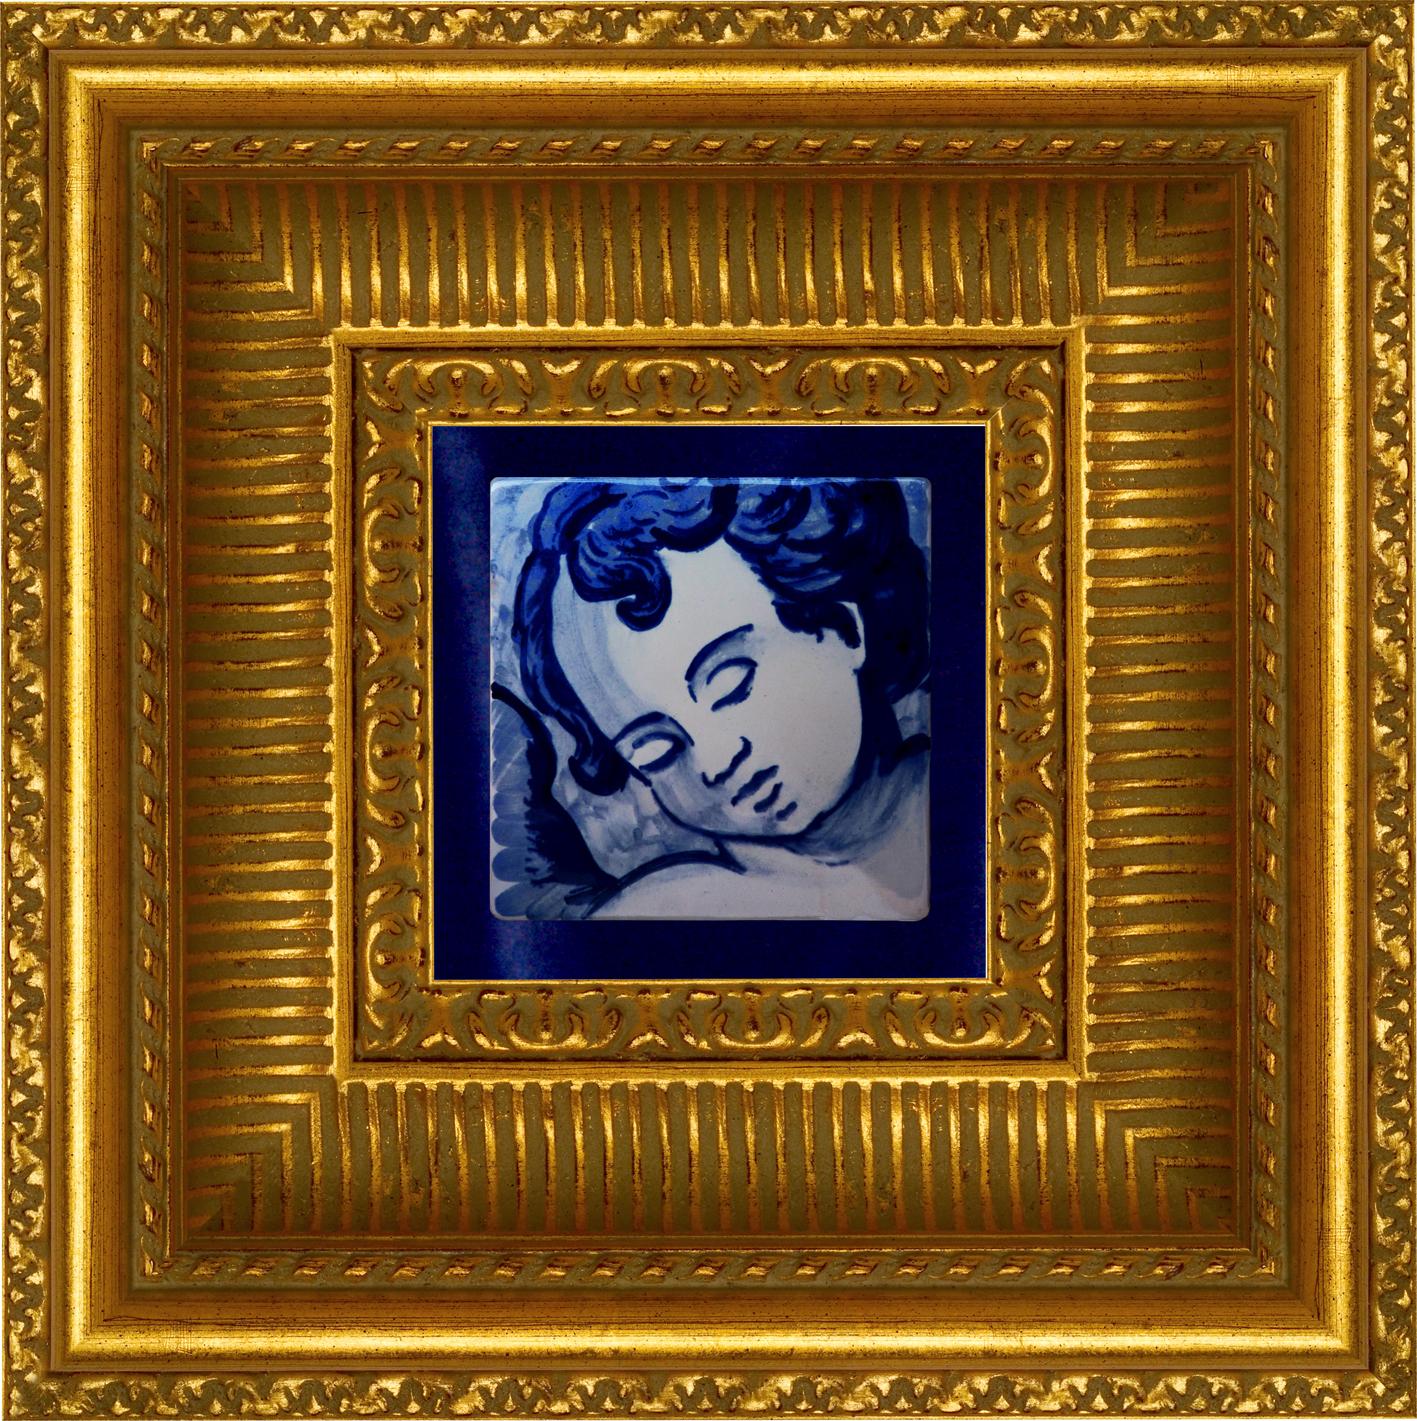 Gorgeous blue hand painted Baroque cherub or angel 18th century style Portuguese ceramic tile/azulejo
The tile painted in cobalt blue over white in typical 18th century Portugal set the taste for monumental ceramic tile applications in churches and